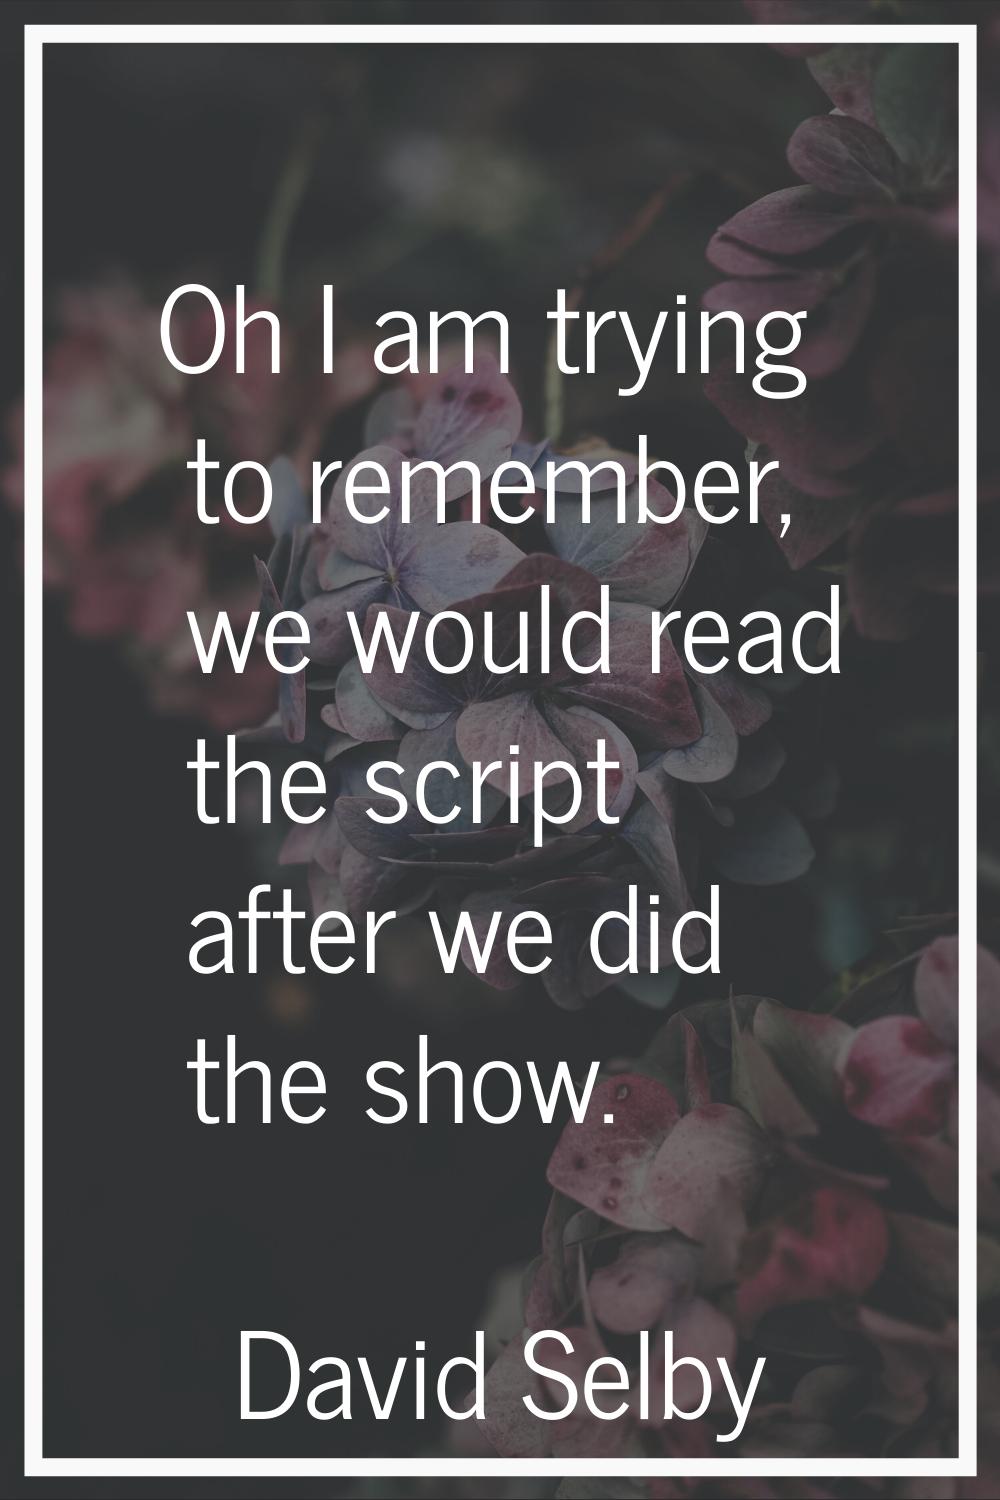 Oh I am trying to remember, we would read the script after we did the show.